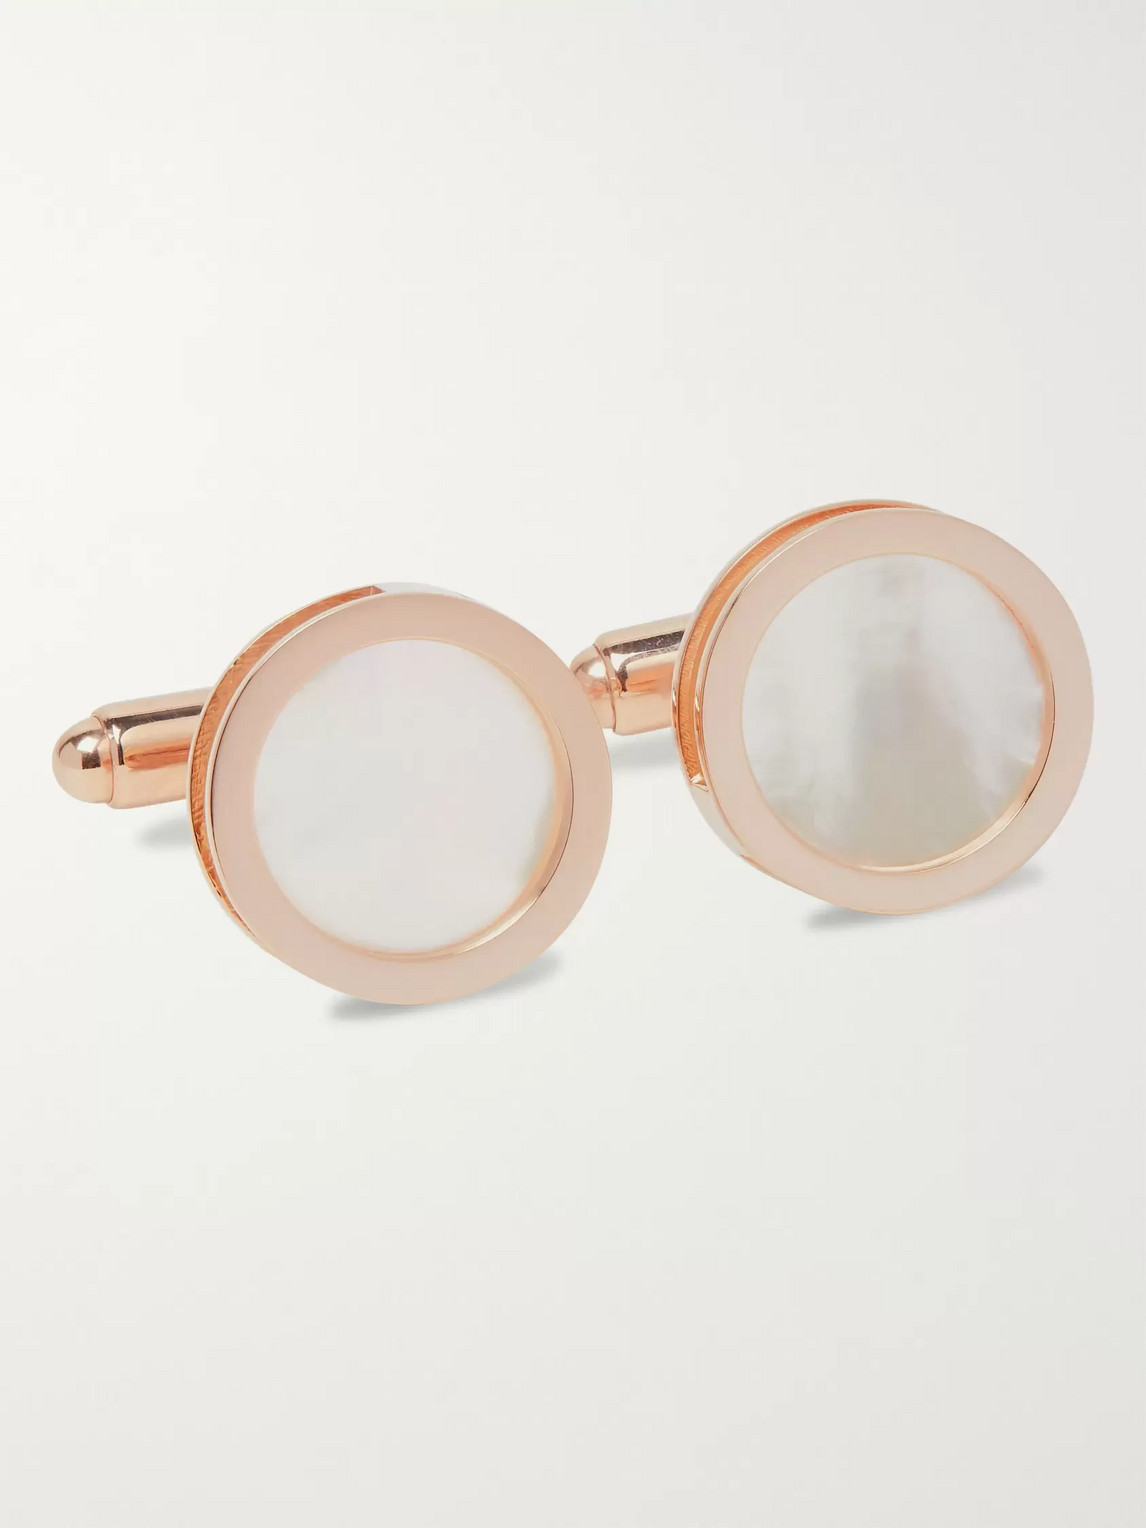 LANVIN ROSE GOLD-PLATED ONYX AND MOTHER-OF-PEARL CUFFLINKS